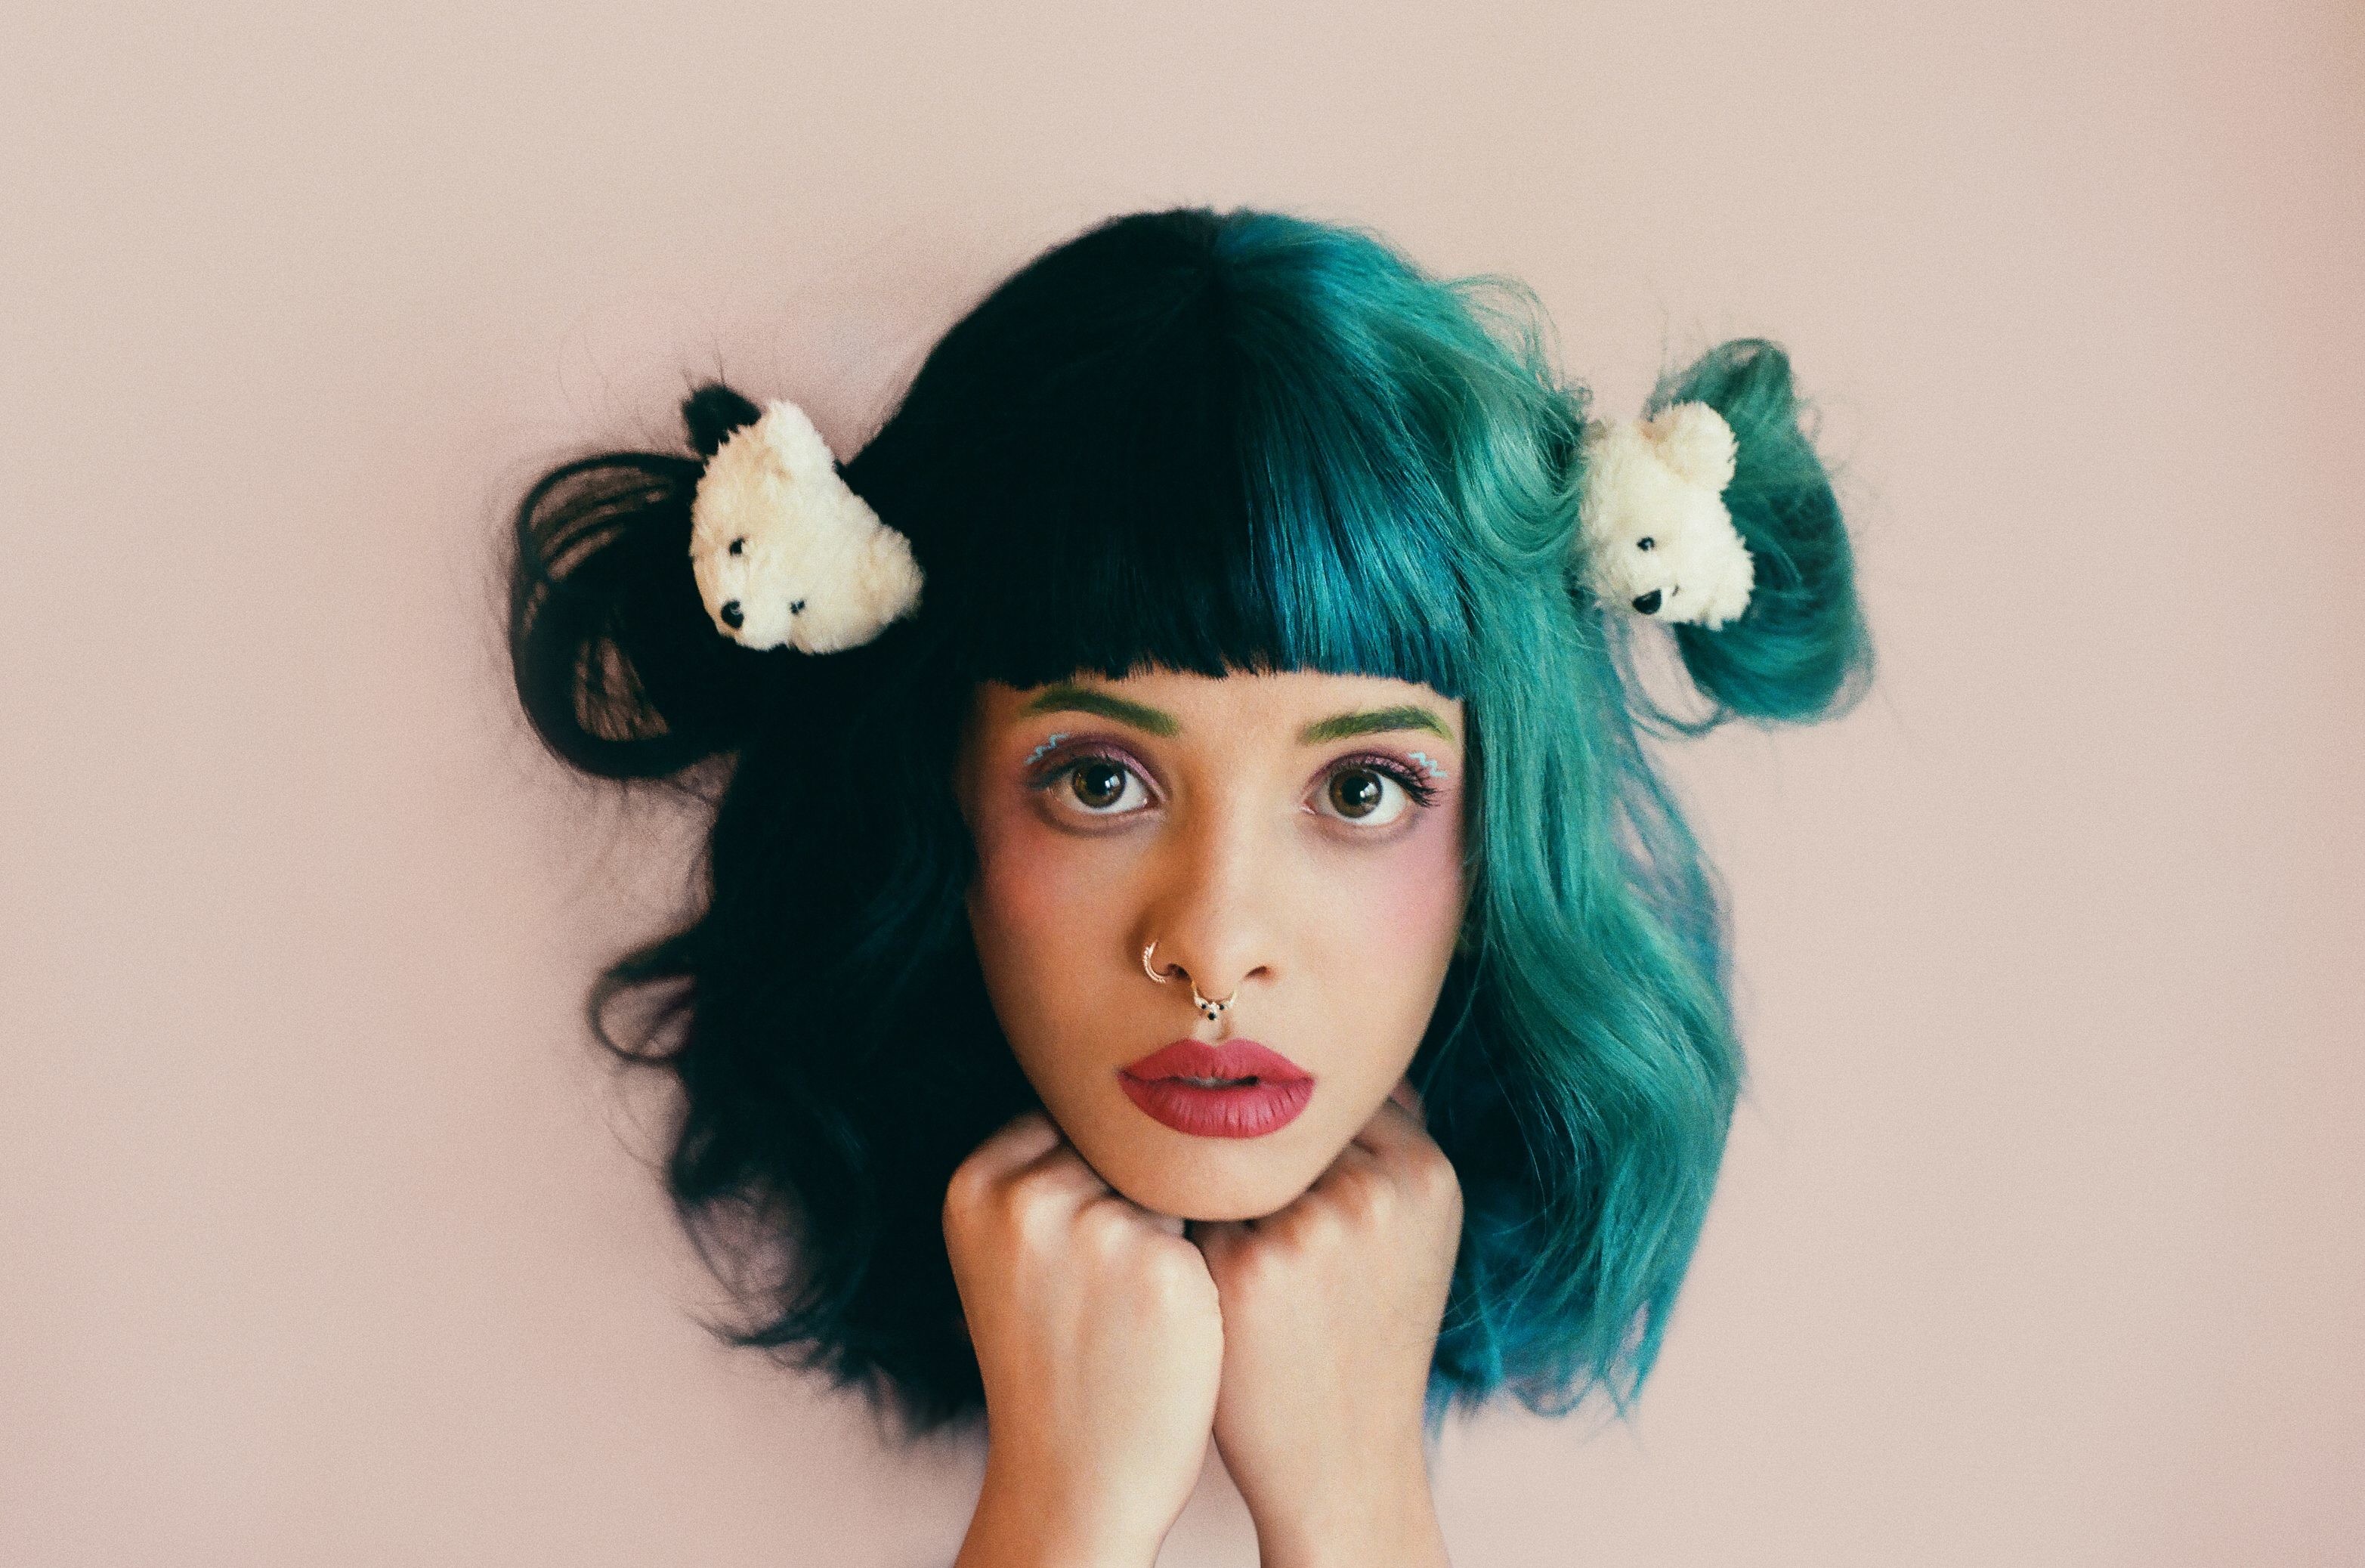 3130x2075 2818x1608 Melanie Martinez Wallpapers Images Photos Pictures Backgrounds